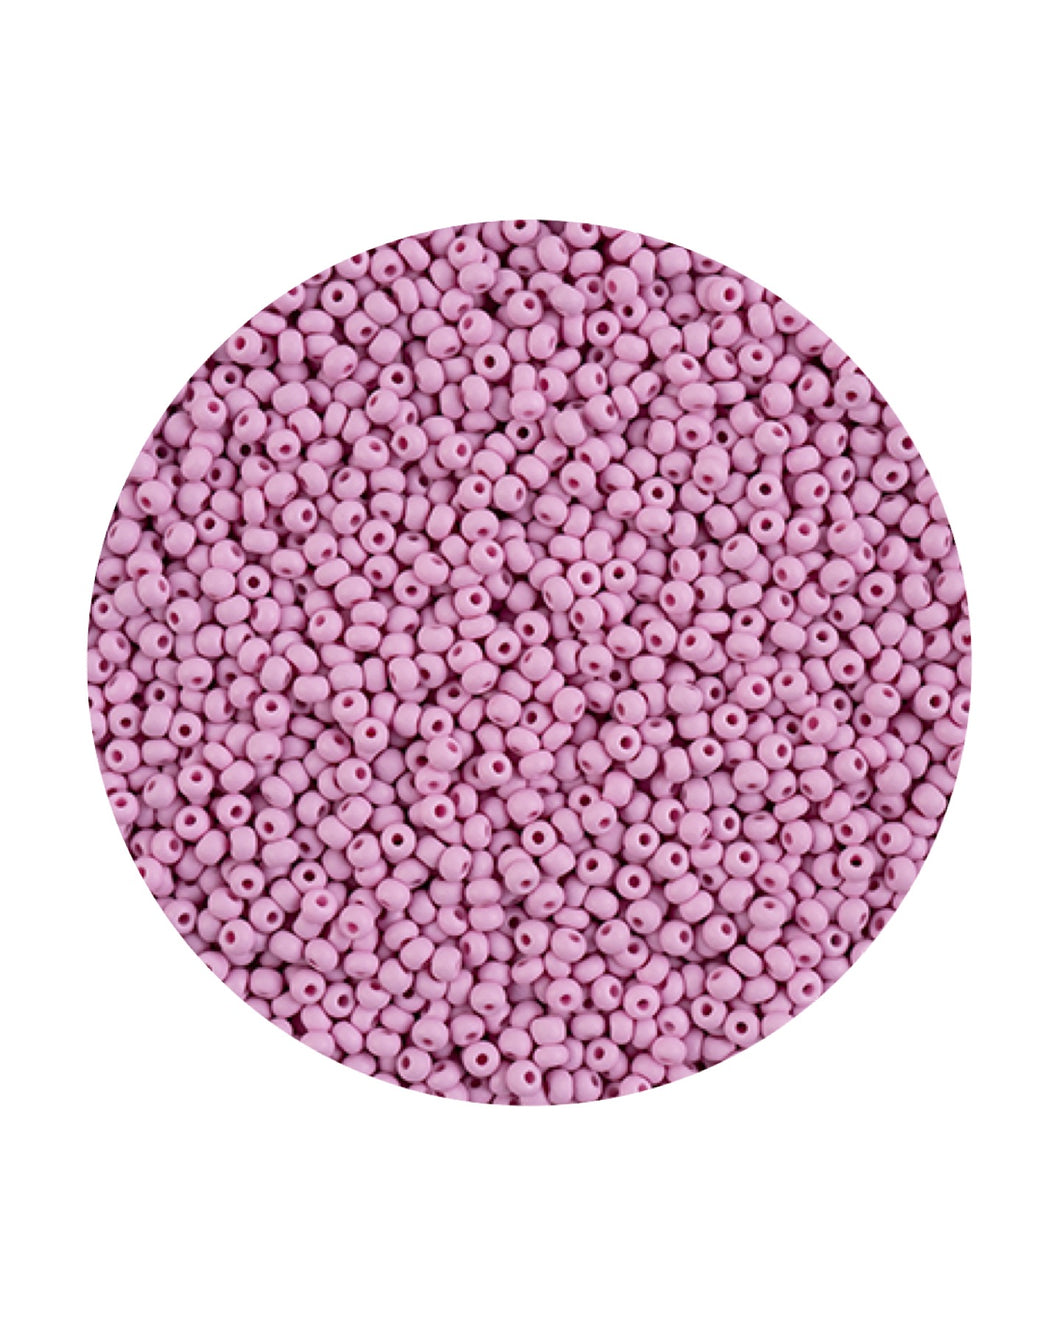 11/0 Preciosa Permalux Seed Beads Dyed Chalk Violet Matte, 23g Bags